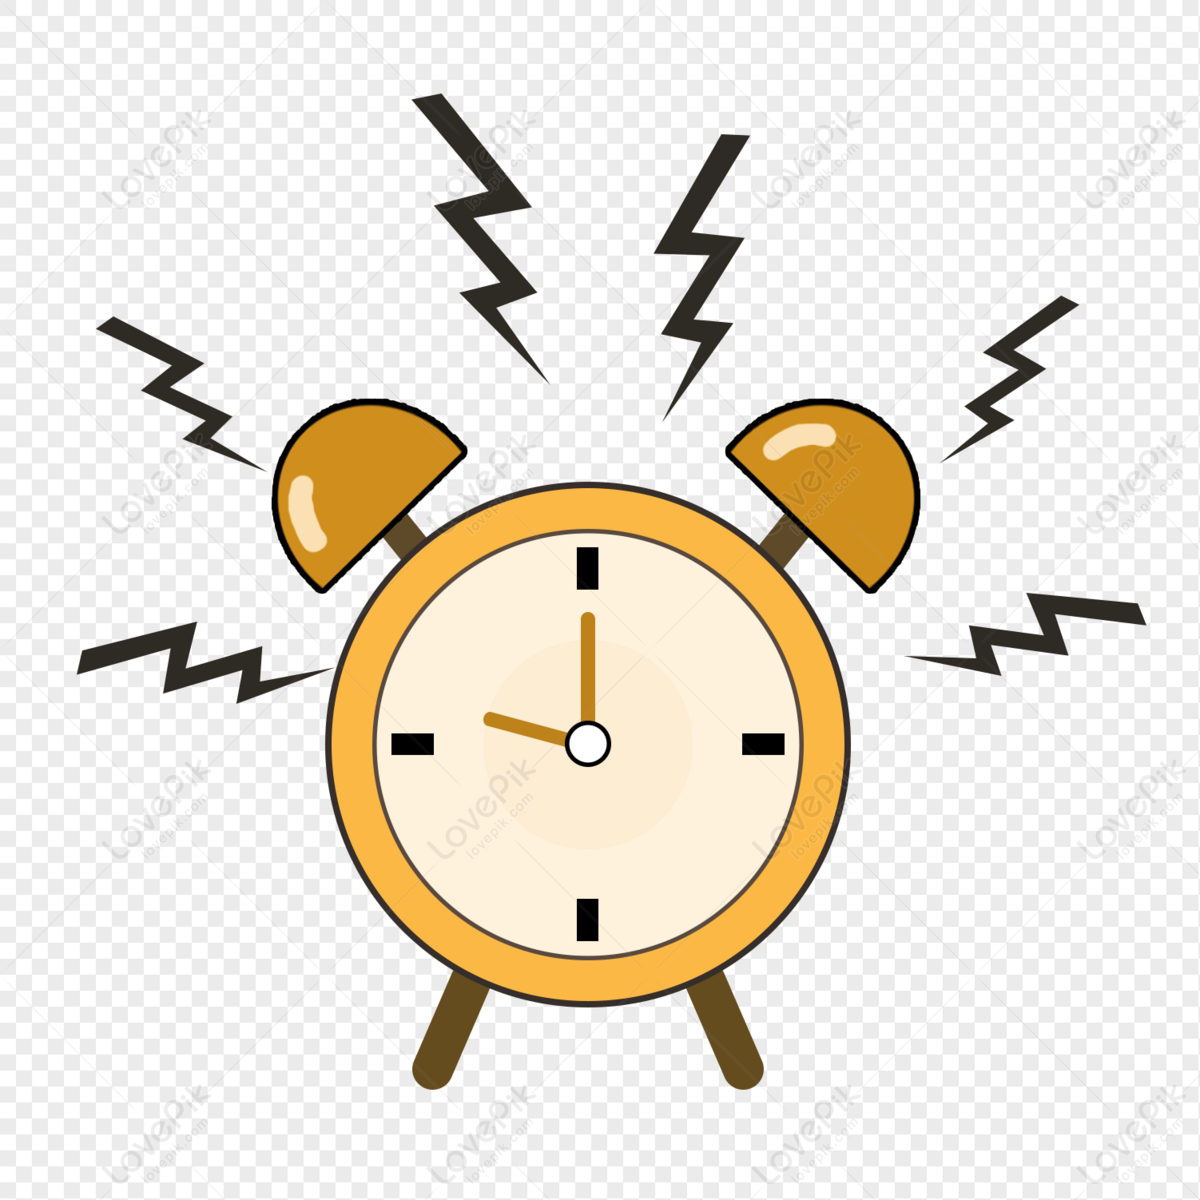 Cartoon Alarm Clock Alarm Clock PNG Image Free Download And Clipart Image  For Free Download - Lovepik | 401563071